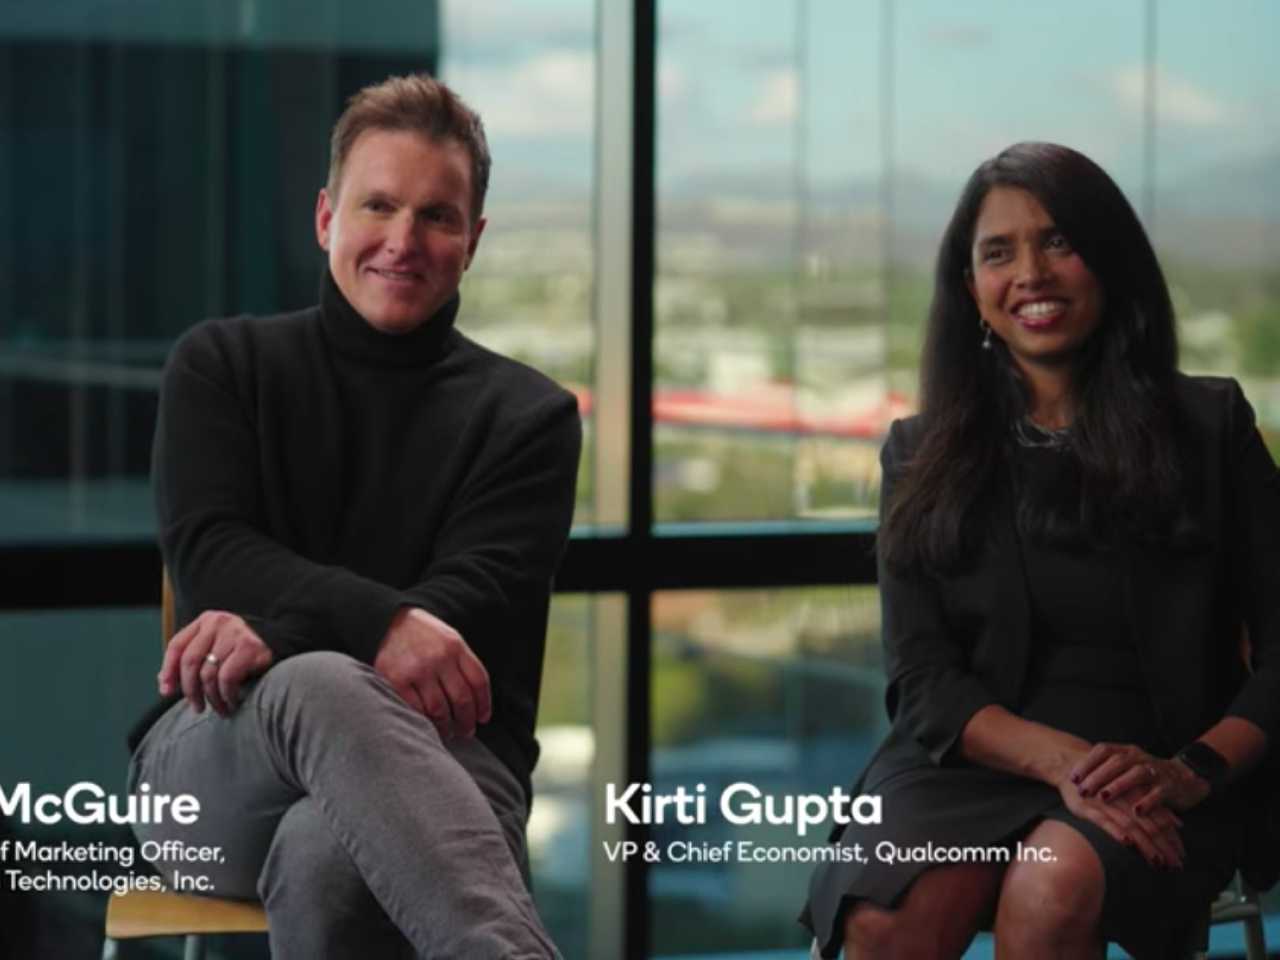 Don McGuire and Kirti Gupta sitting down for an interview